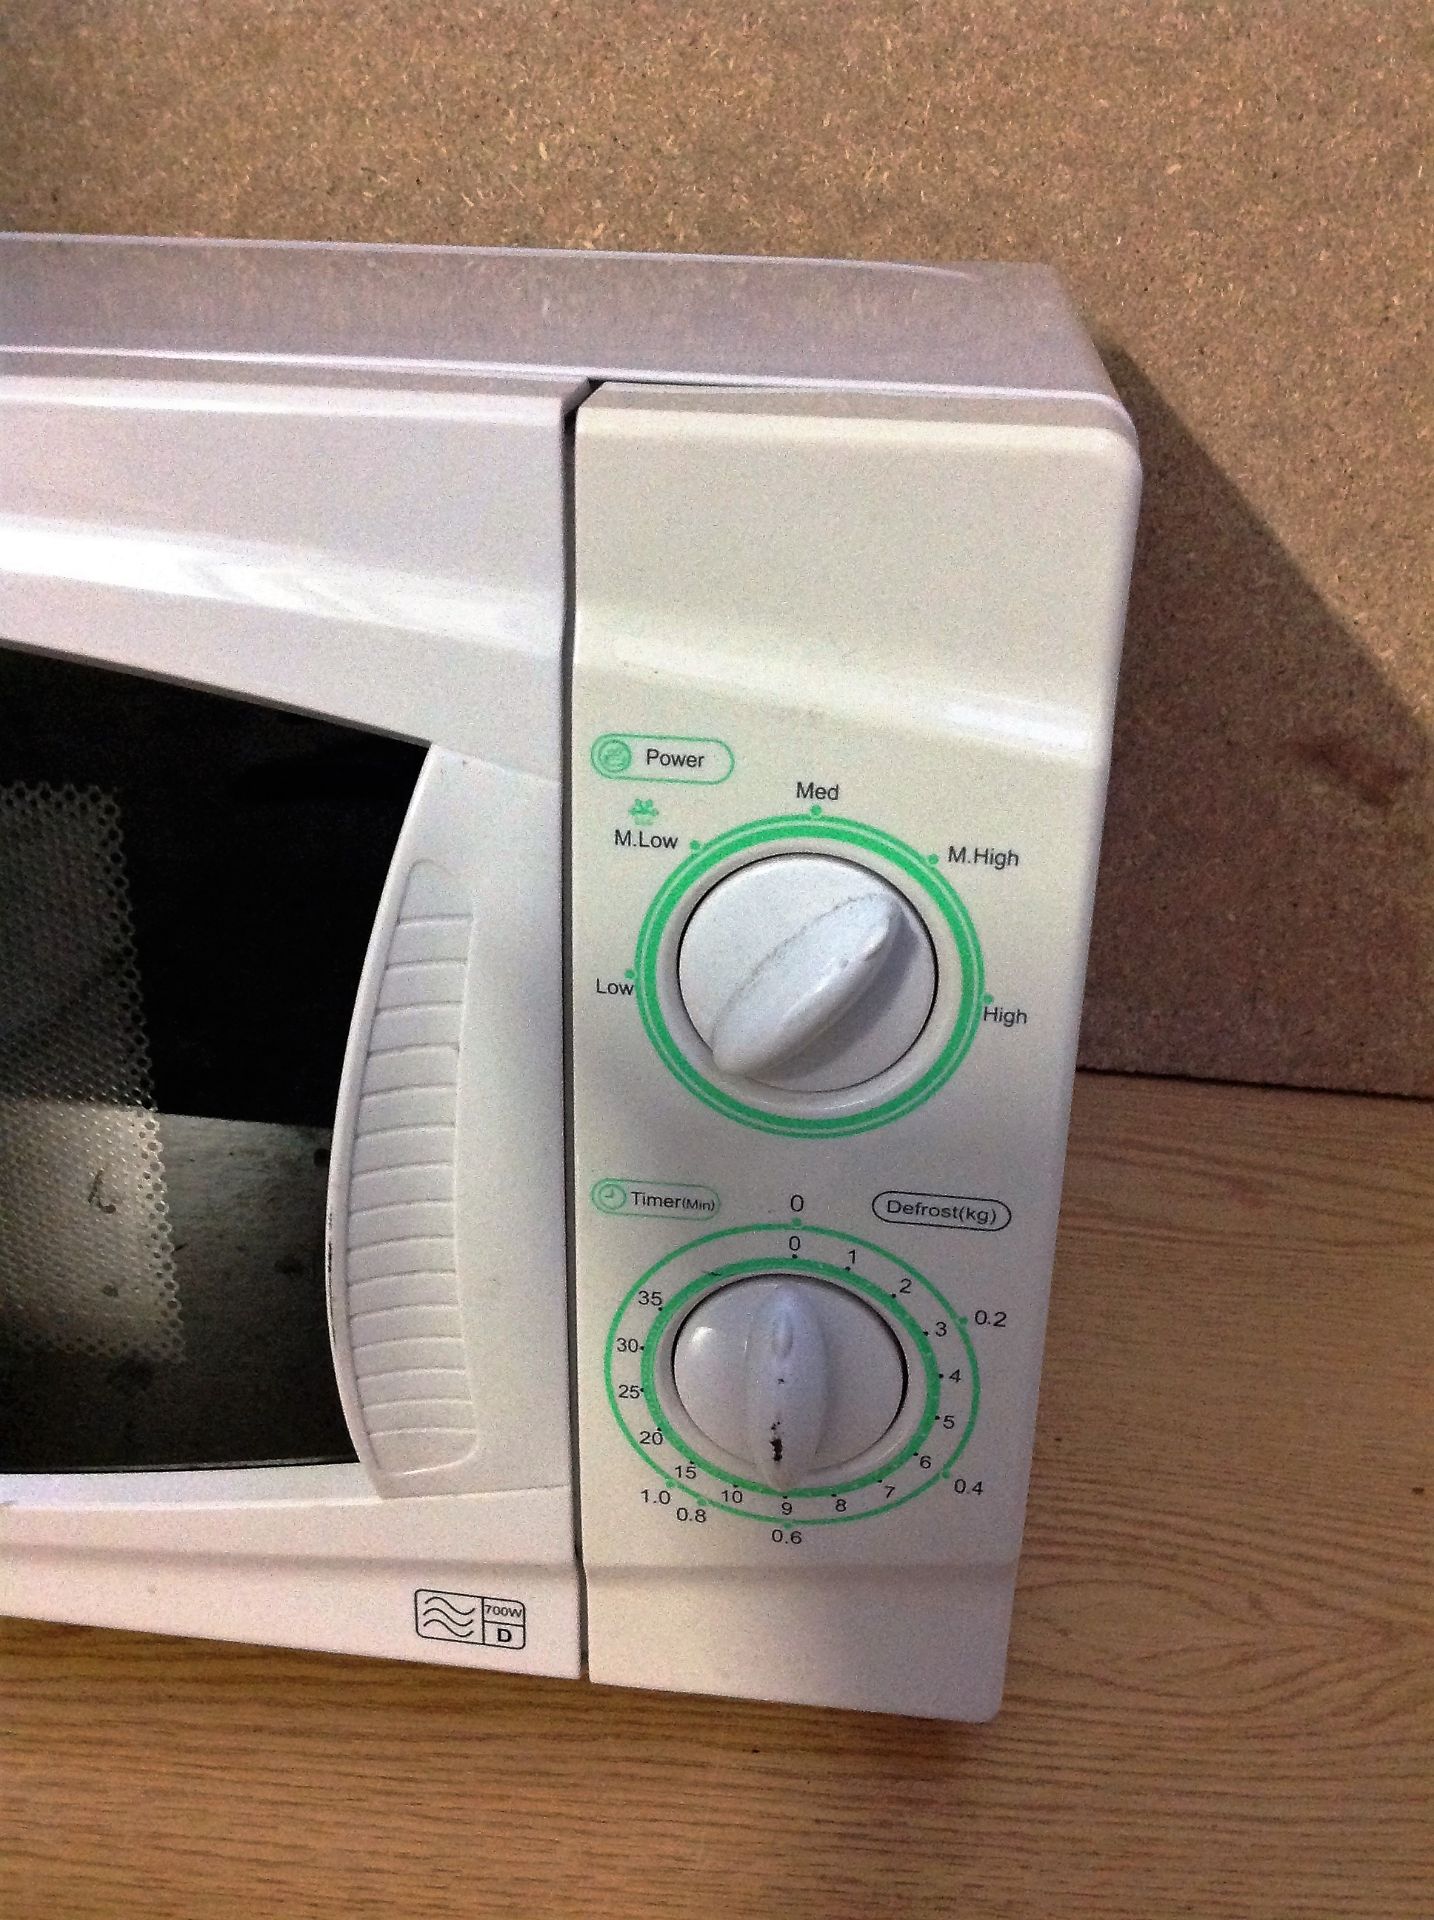 Sainsburys Domestic White Microwave Oven - Model: 587115 - Image 2 of 4